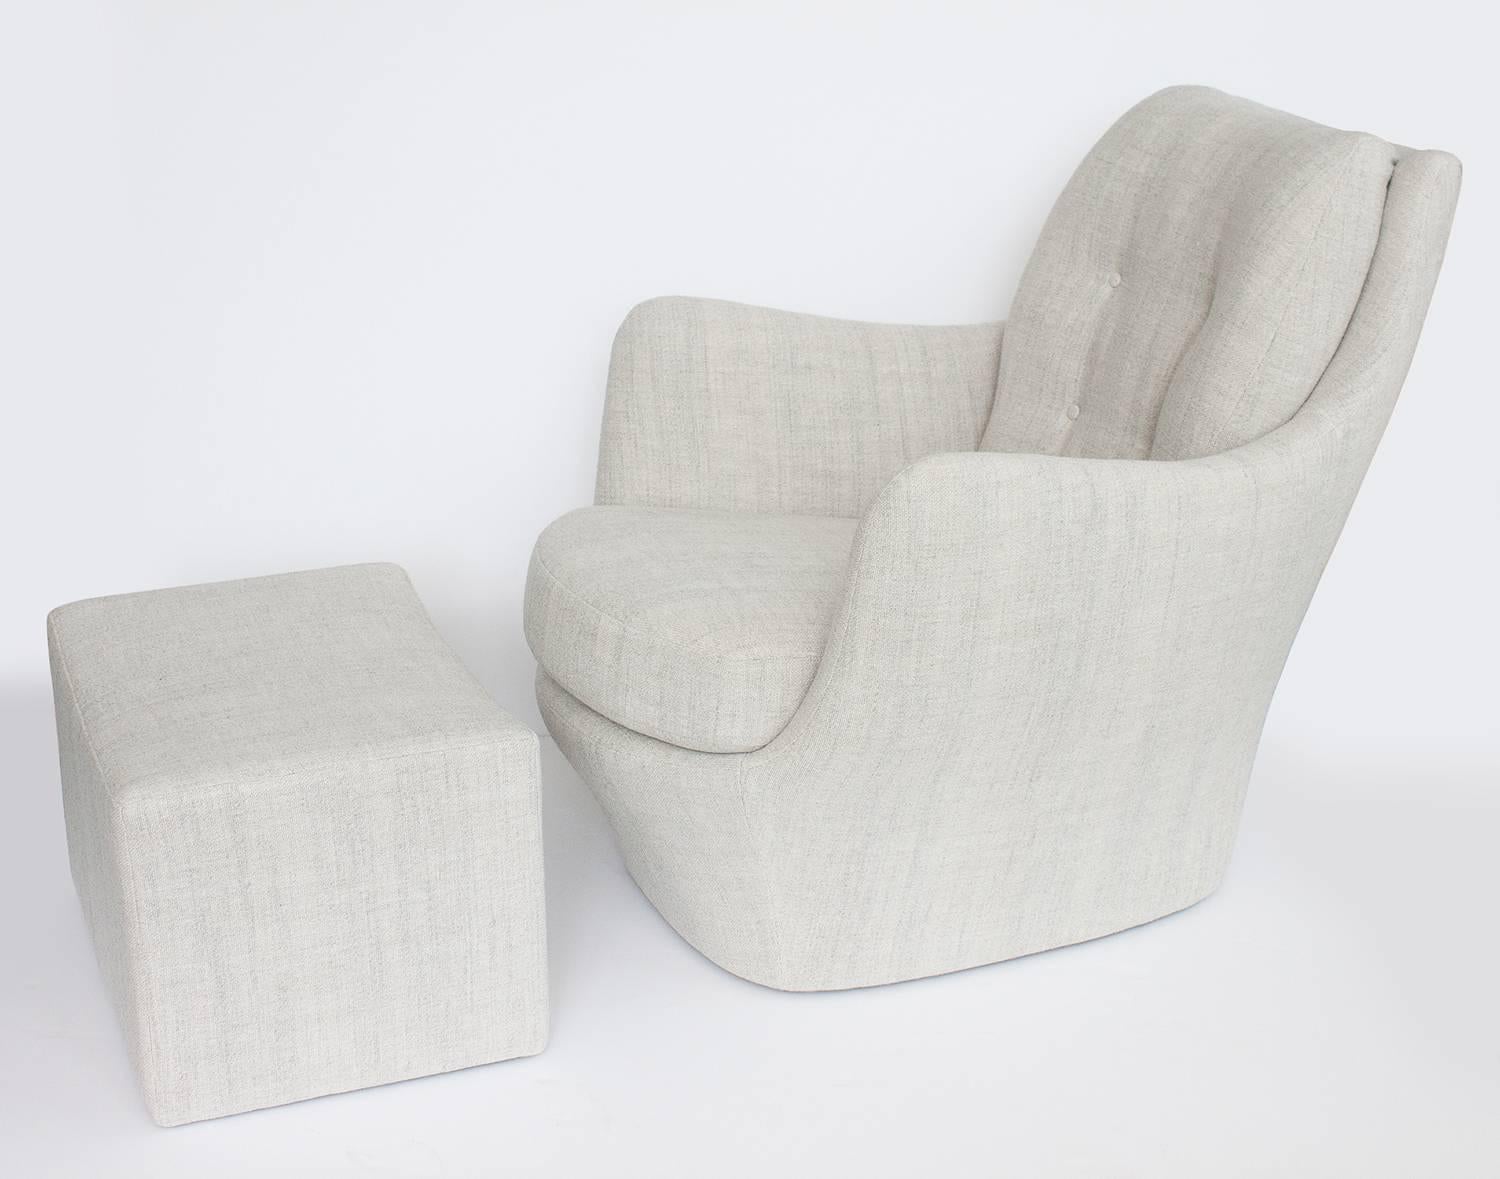 A sophisticated and sculptural lounge chair / ottoman by Milo Baughman for Thayer Coggin. Curvaceous fully upholstered armchair with loose seat cushion and button tufted semi attached back. Ottoman has hidden caster wheels. Newly upholstered in a